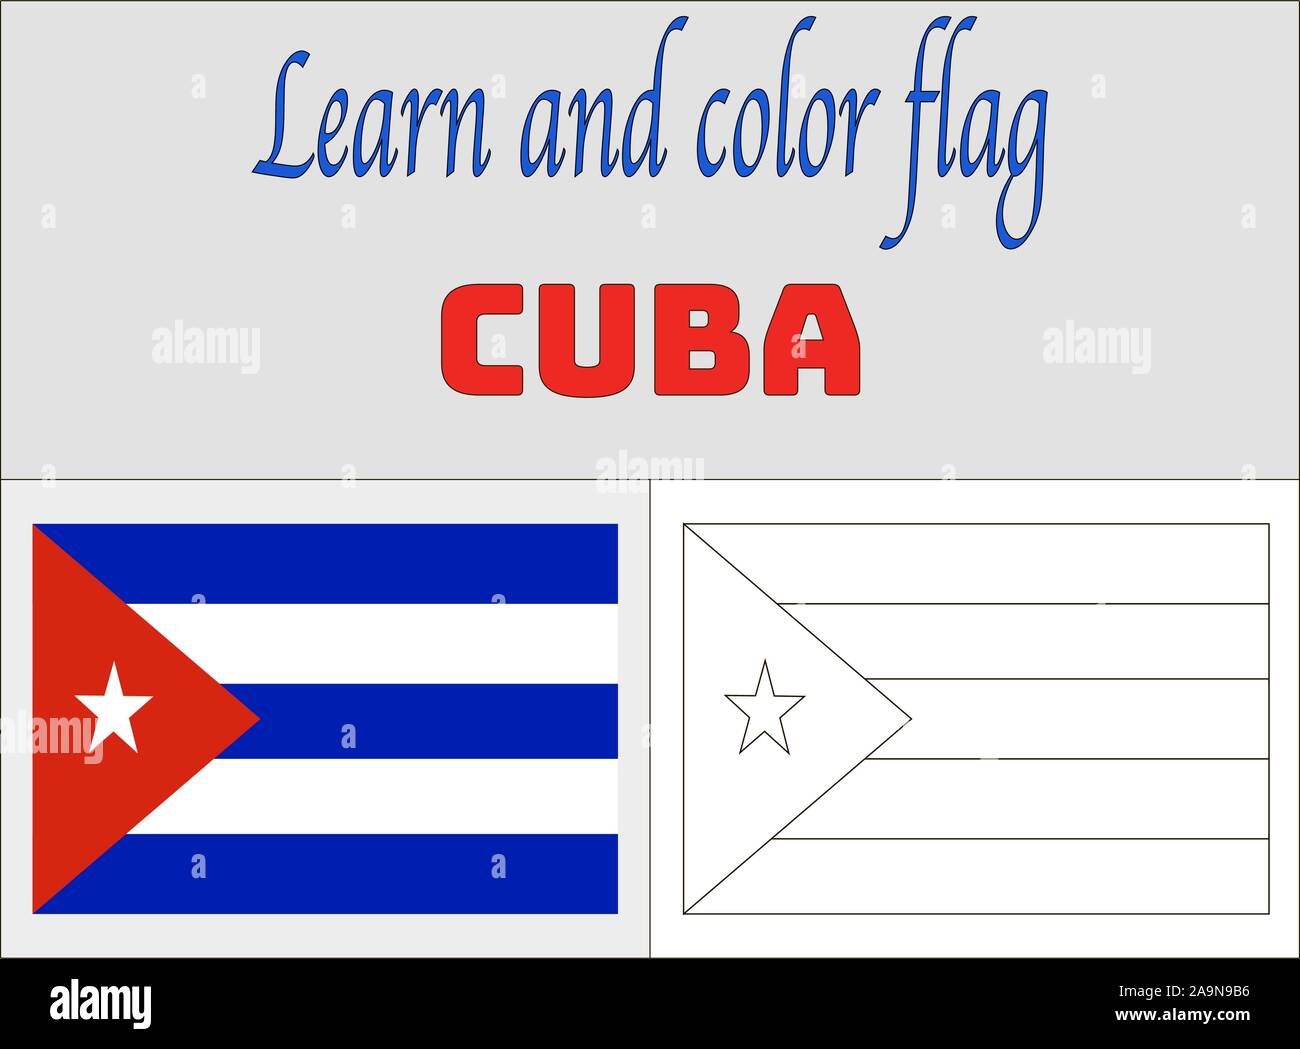 American cuba national flag coloring book pages for education and learning original colors proportion vector illustration countries set stock vector image art